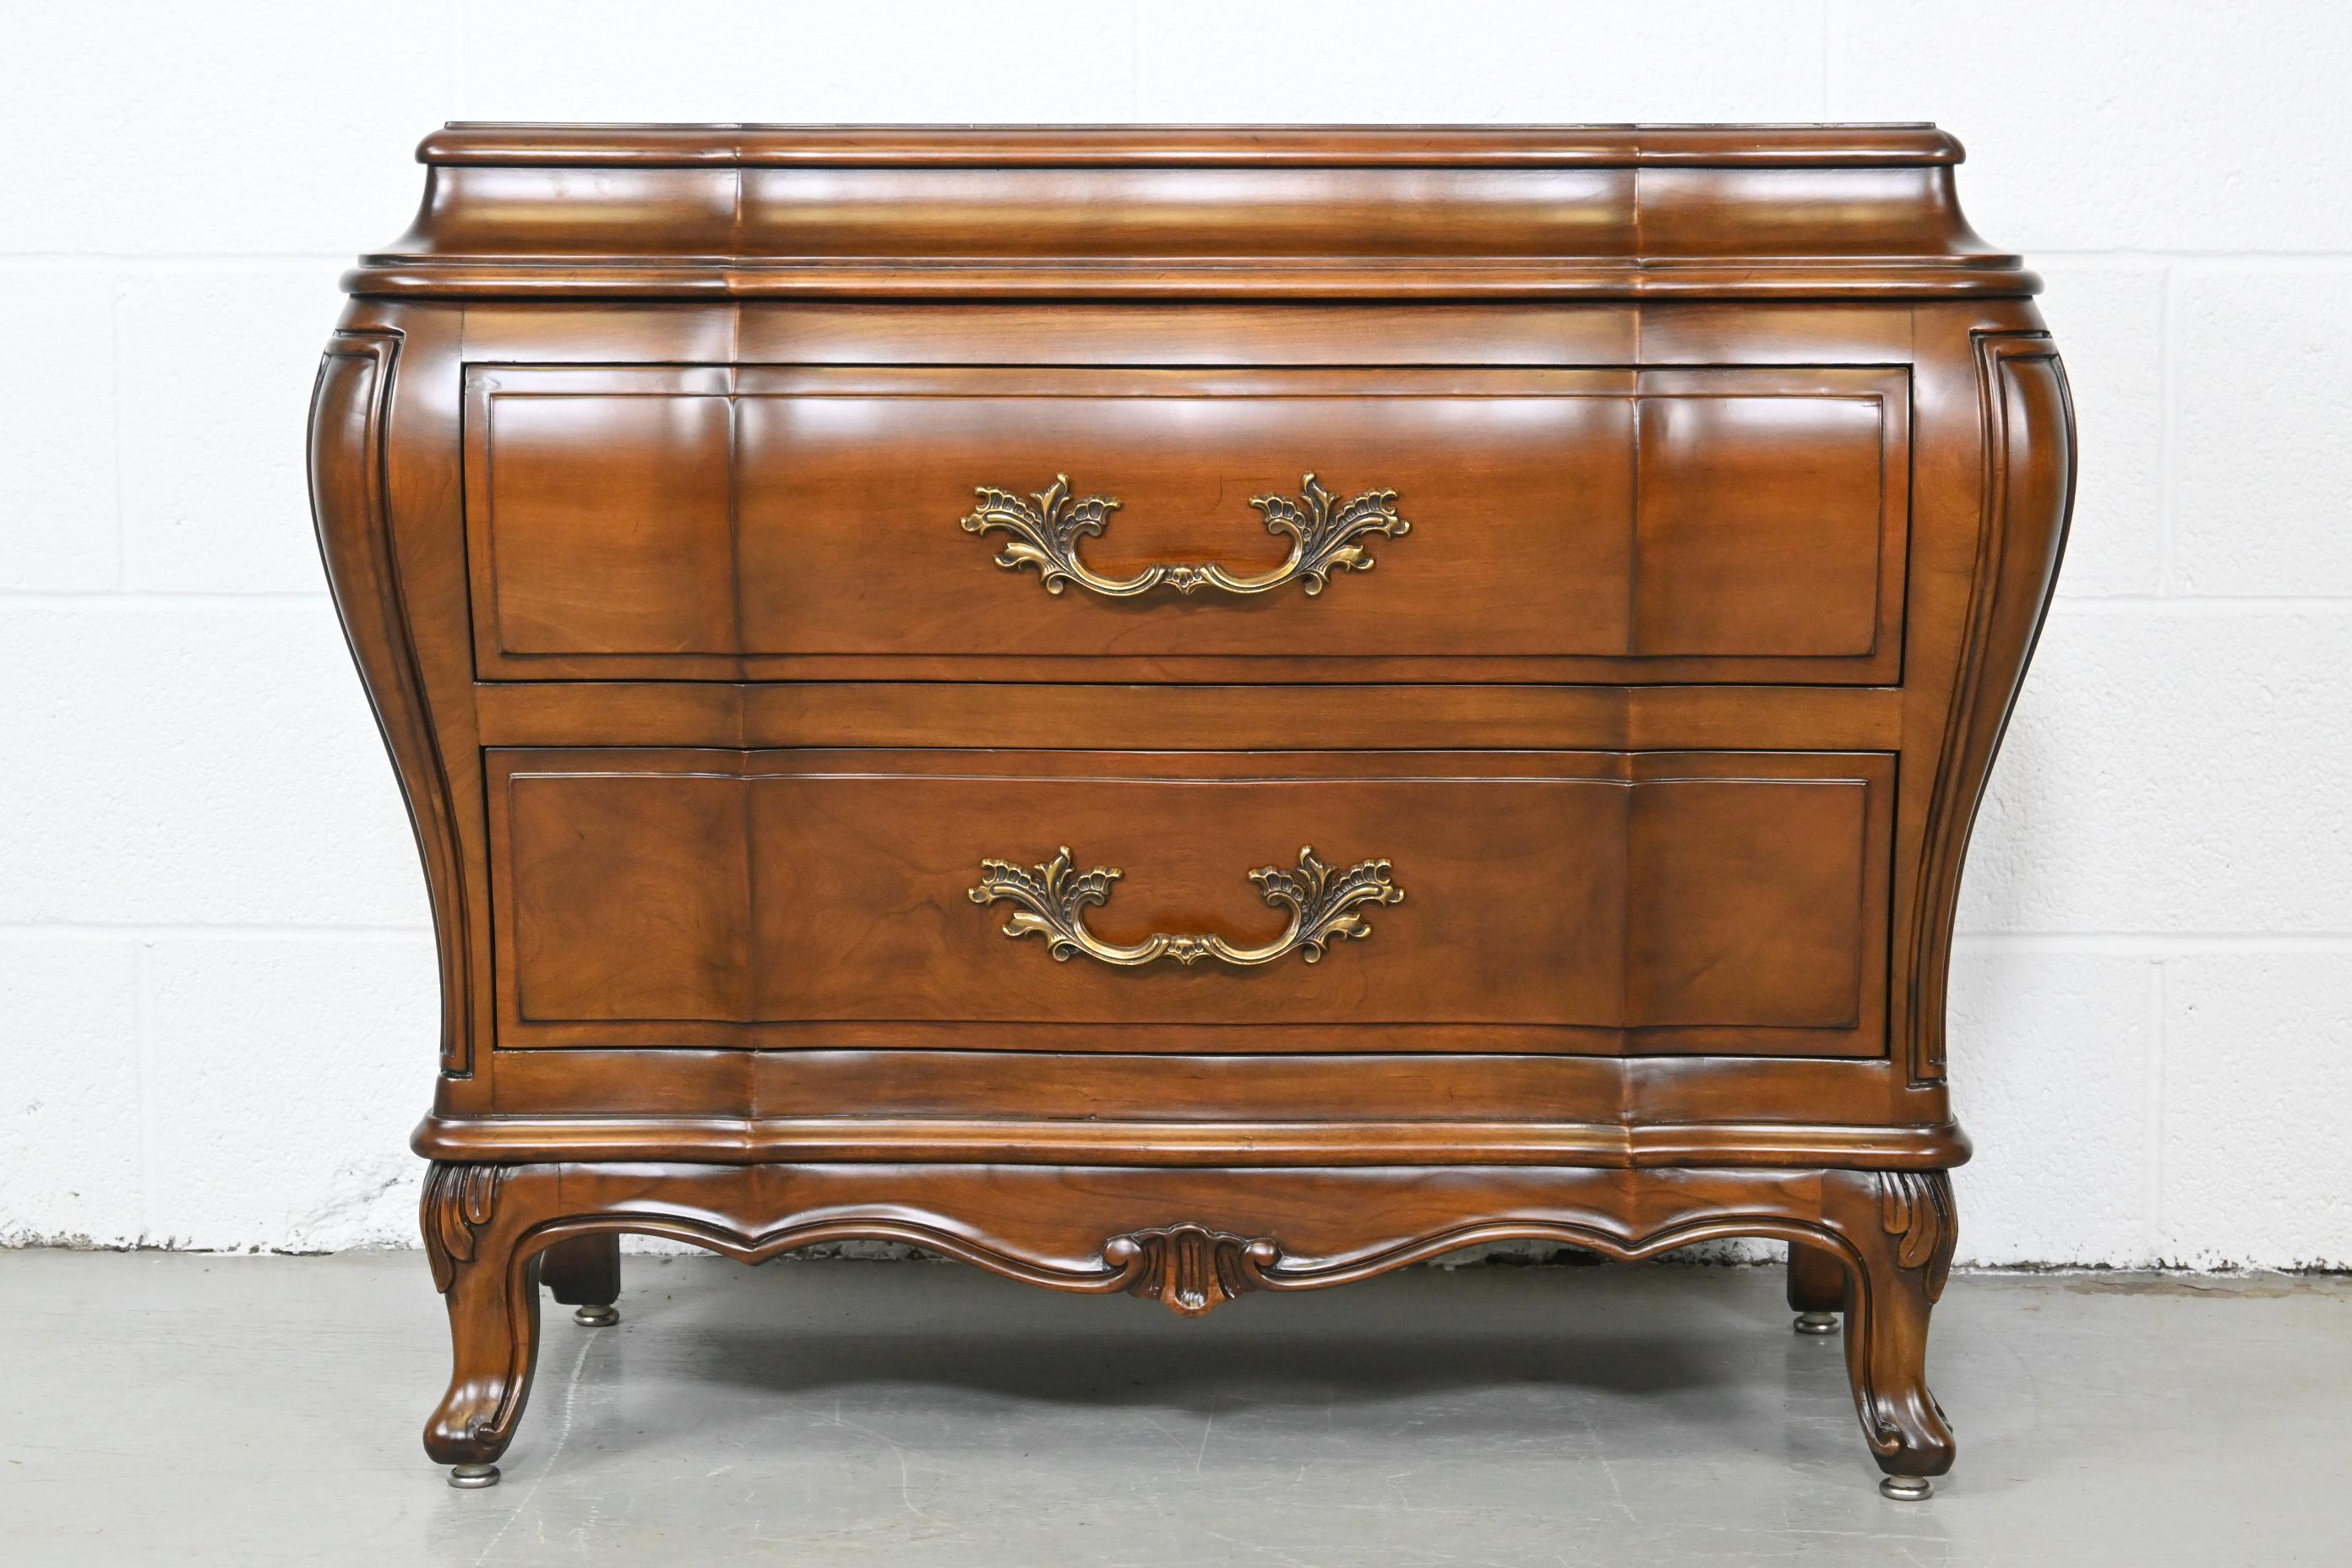 Karges French Provincial Walnut and Burl Nightstand or Bedside Chest

Karges Furniture, USA, 1970s

Measures: 33 Wide x 18 Deep x 26.5 High

Two-drawer burled wood bombay chest with brass pulls.

Professionally Restored. Excellent condition